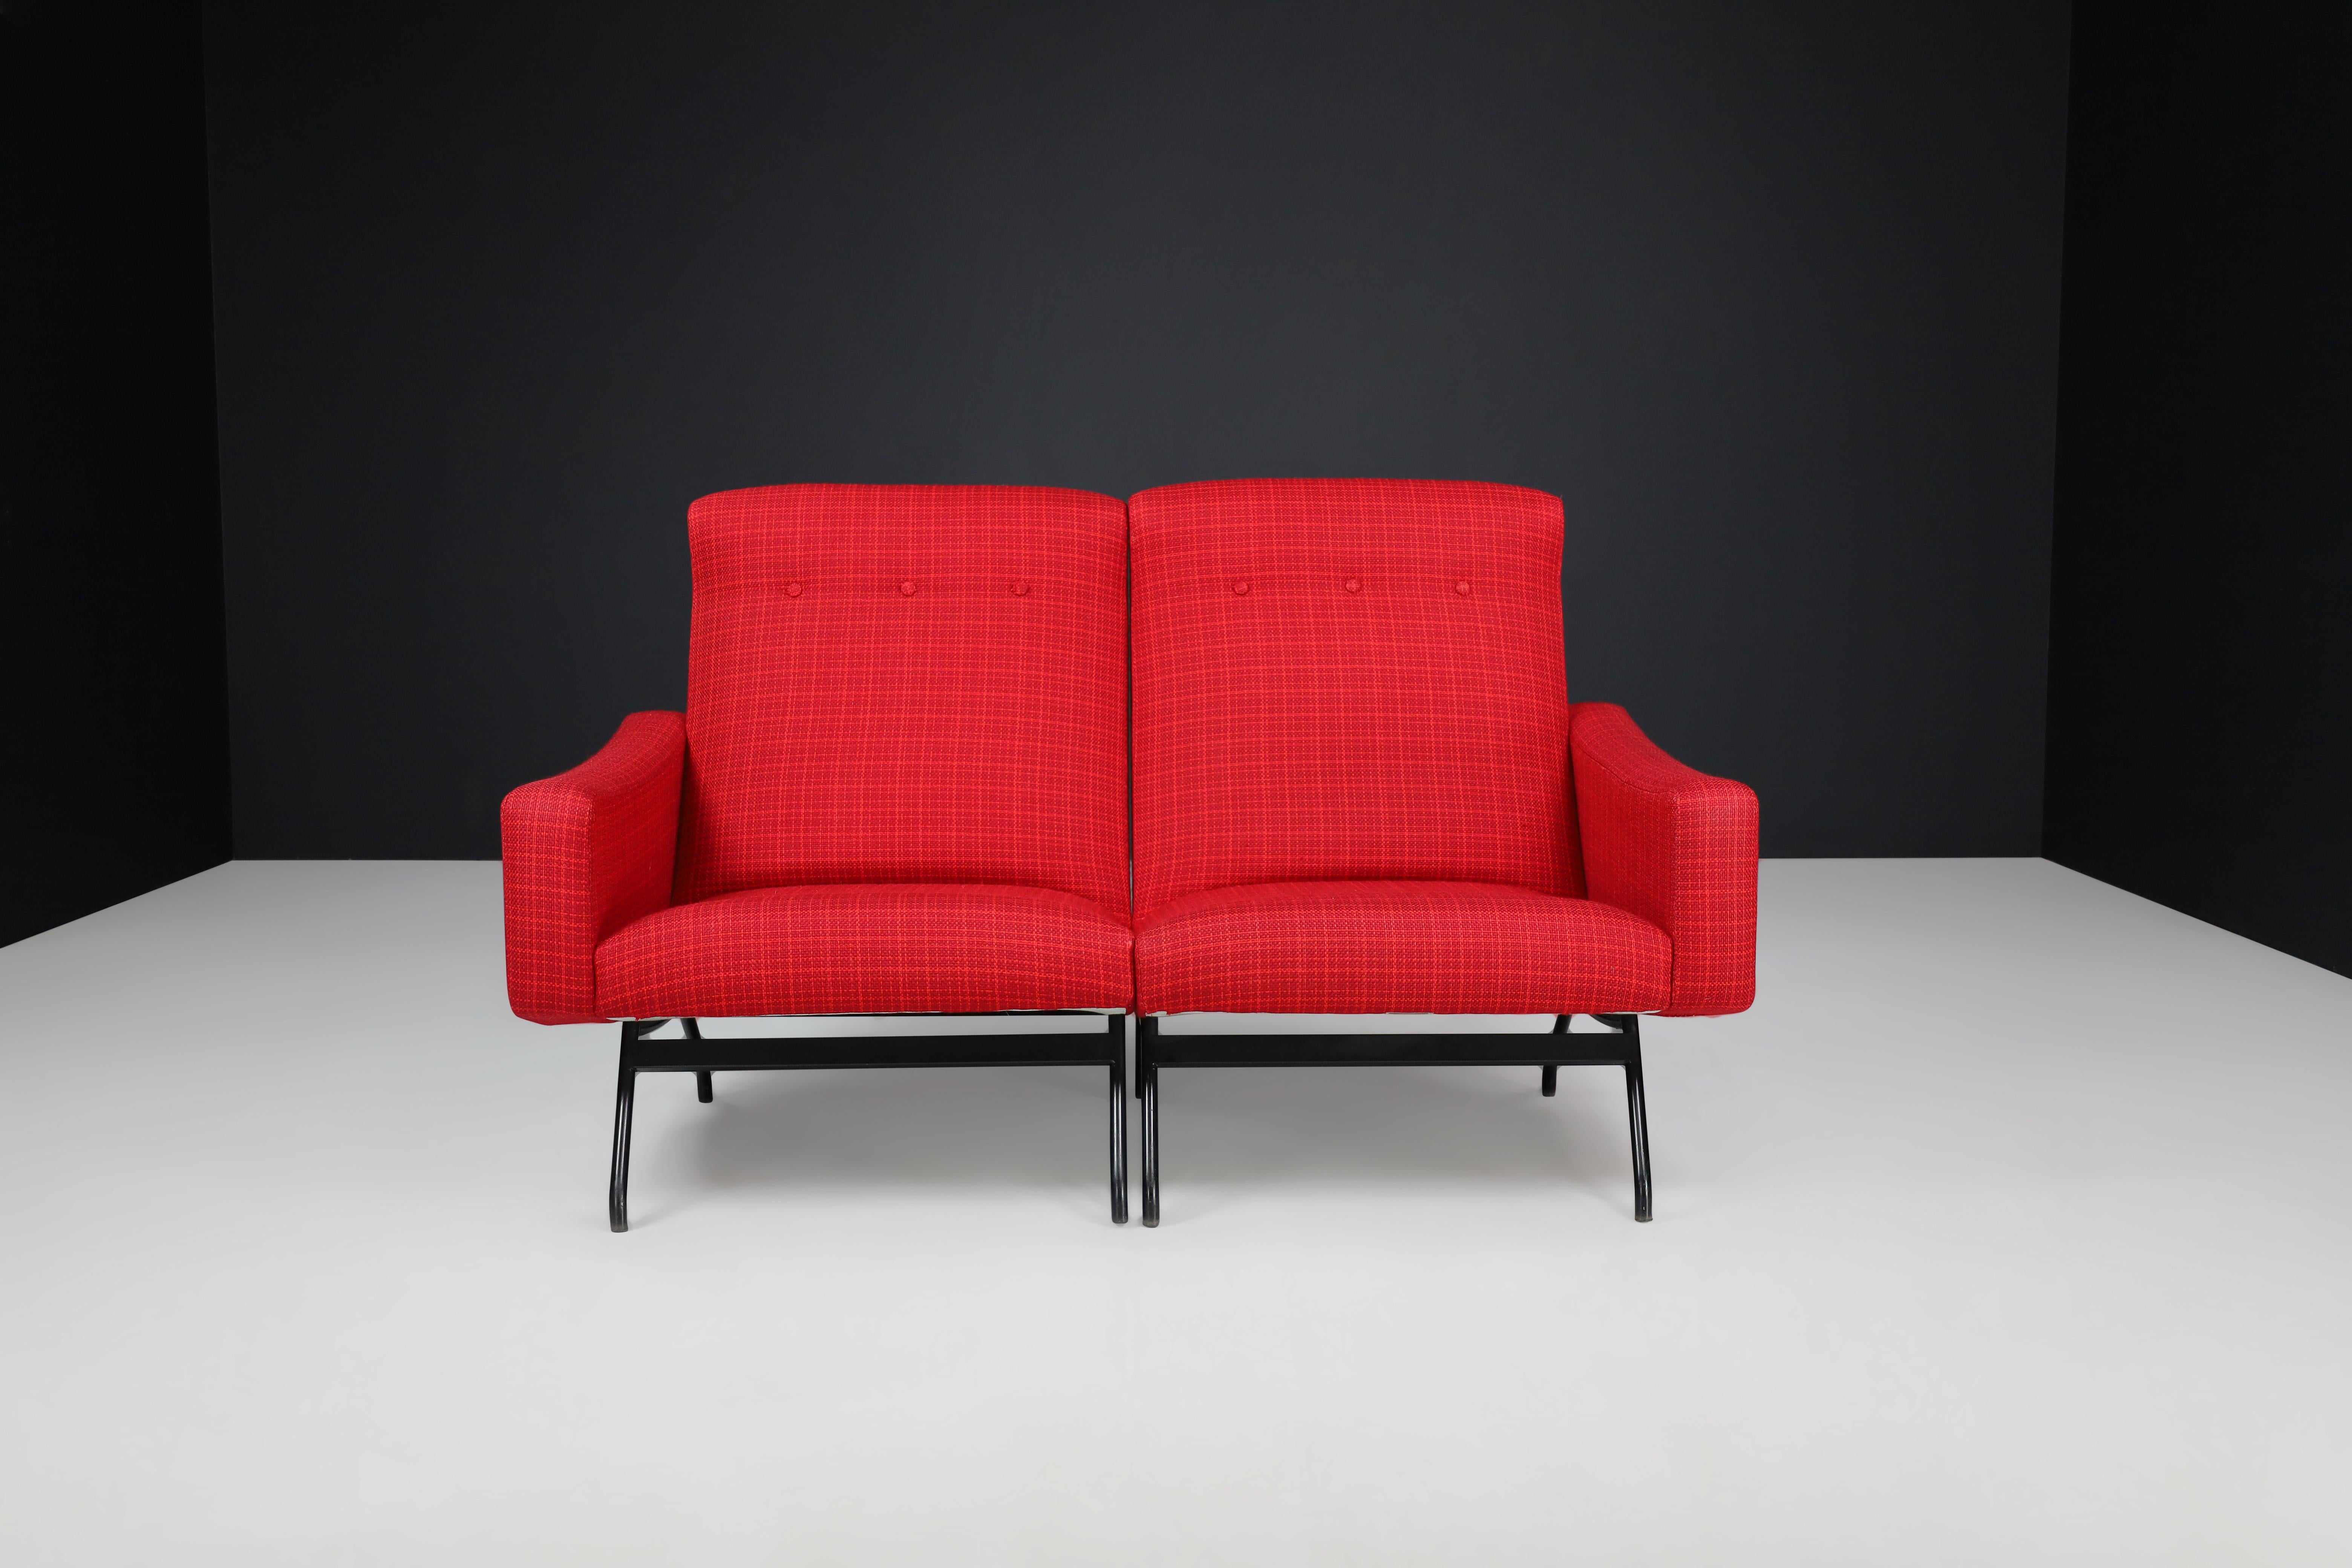 Joseph-Andre´ Motte Sectional Sofa Two Seat Red Original Upholstery France, 1950s
This is a set of two sectional sofa seats designed by Joseph-Andre´ Motte in France in the 1950s and manufactured by Steiner. The seats are well-made and exhibit